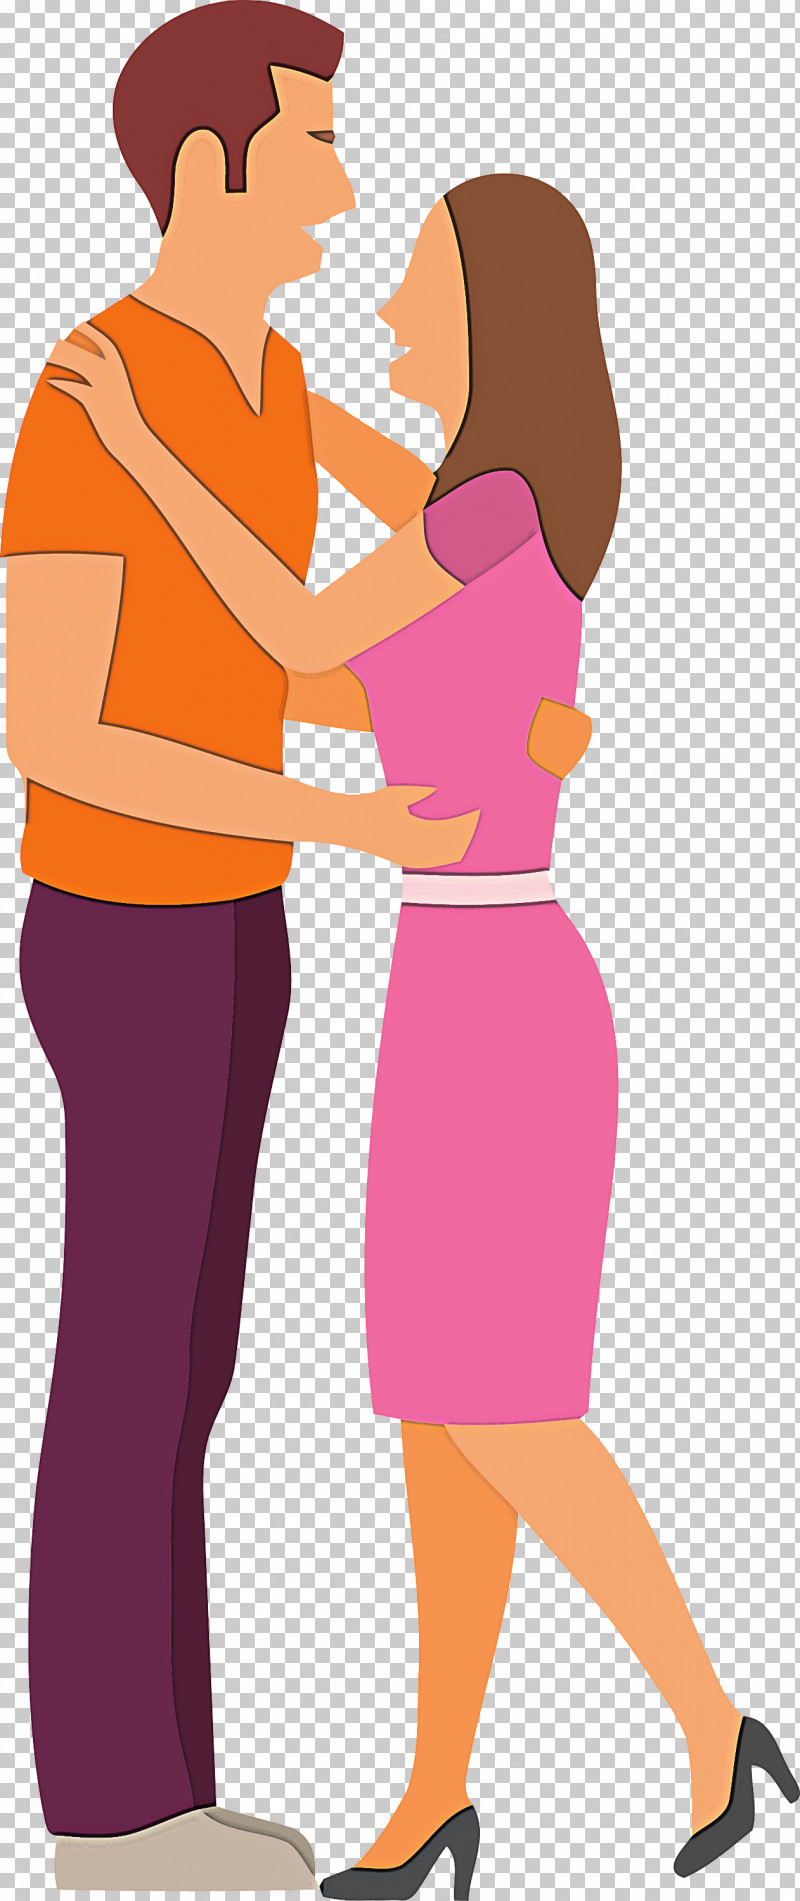 Couple Lover PNG, Clipart, Cartoon, Conversation, Couple, Gesture, Interaction Free PNG Download